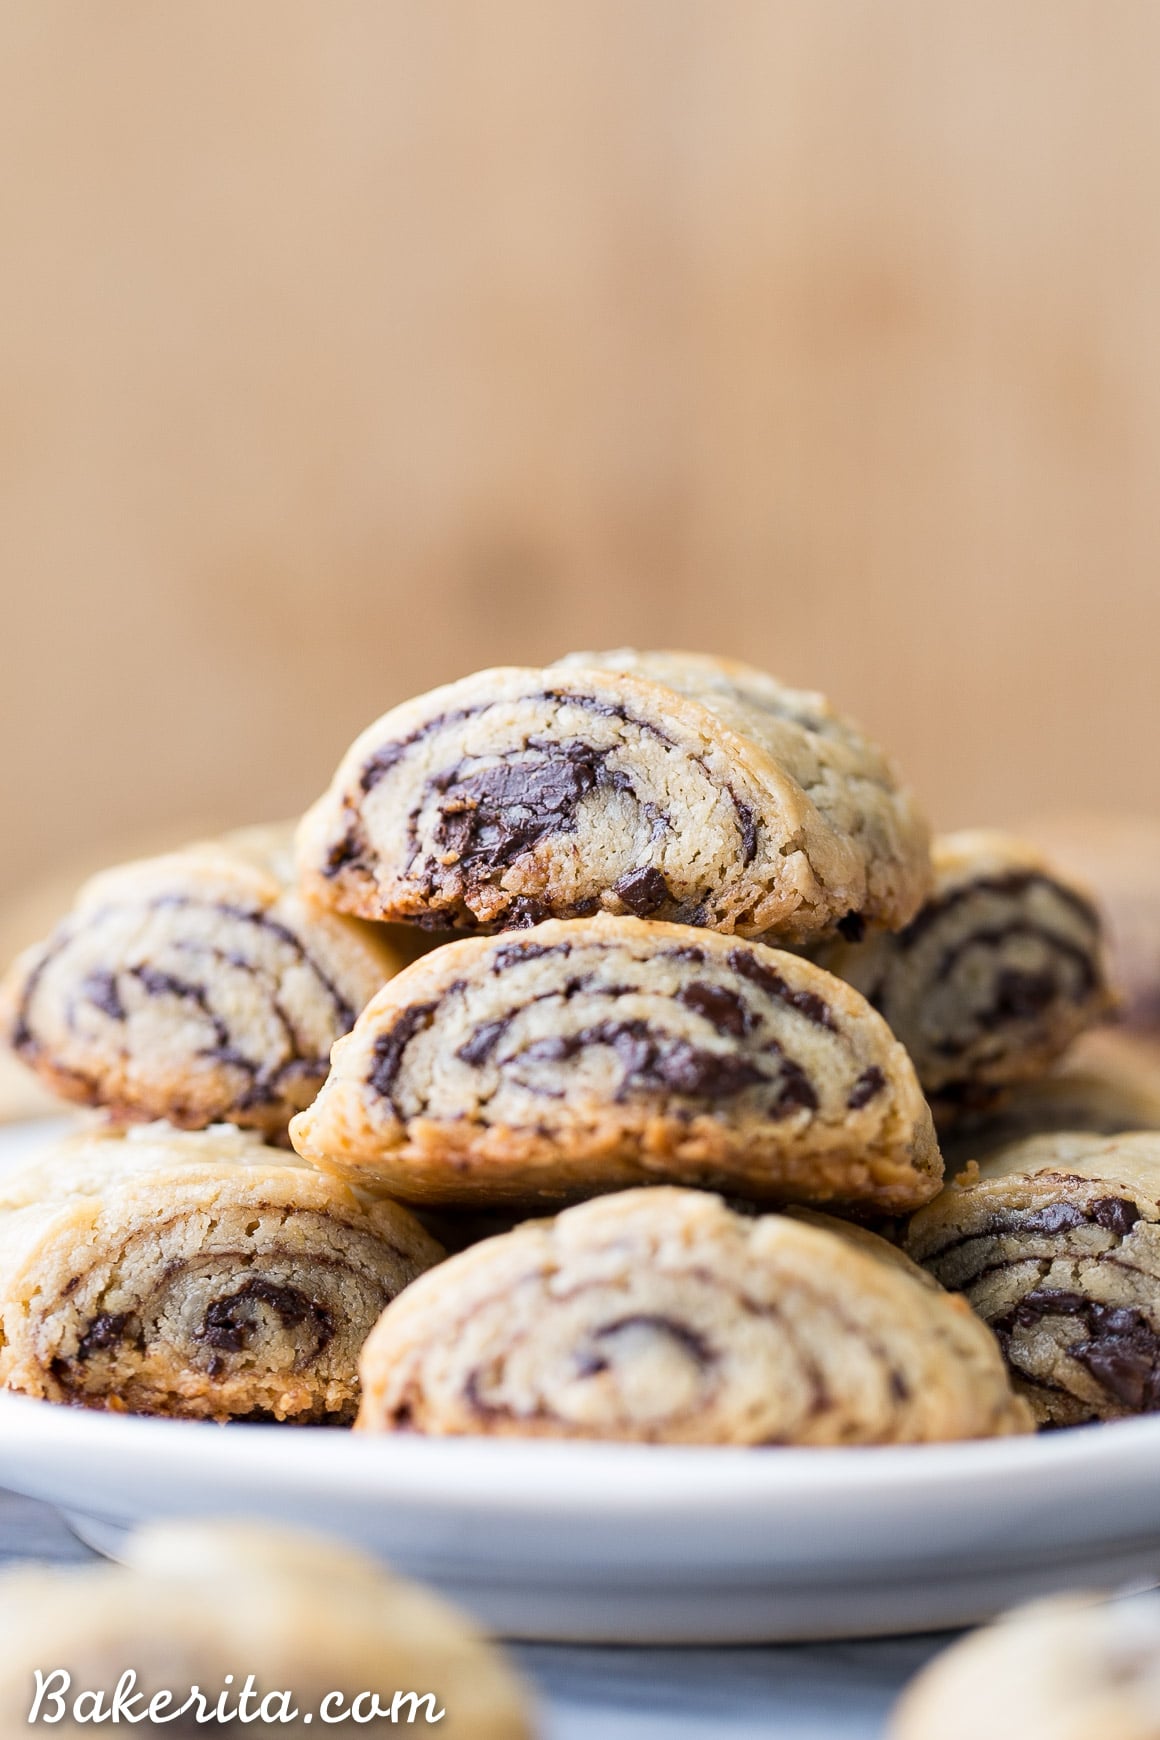 These Chocolate Rugelach are incredibly tender and flaky, thanks to the cream cheese-based dough. These refined sugar-free and gluten-free rugelach are filled with dark chocolate shavings for an irresistible holiday treat. #bakerita #holidaytreat #glutenfree #refinedsugarfree #cookies #dessert 